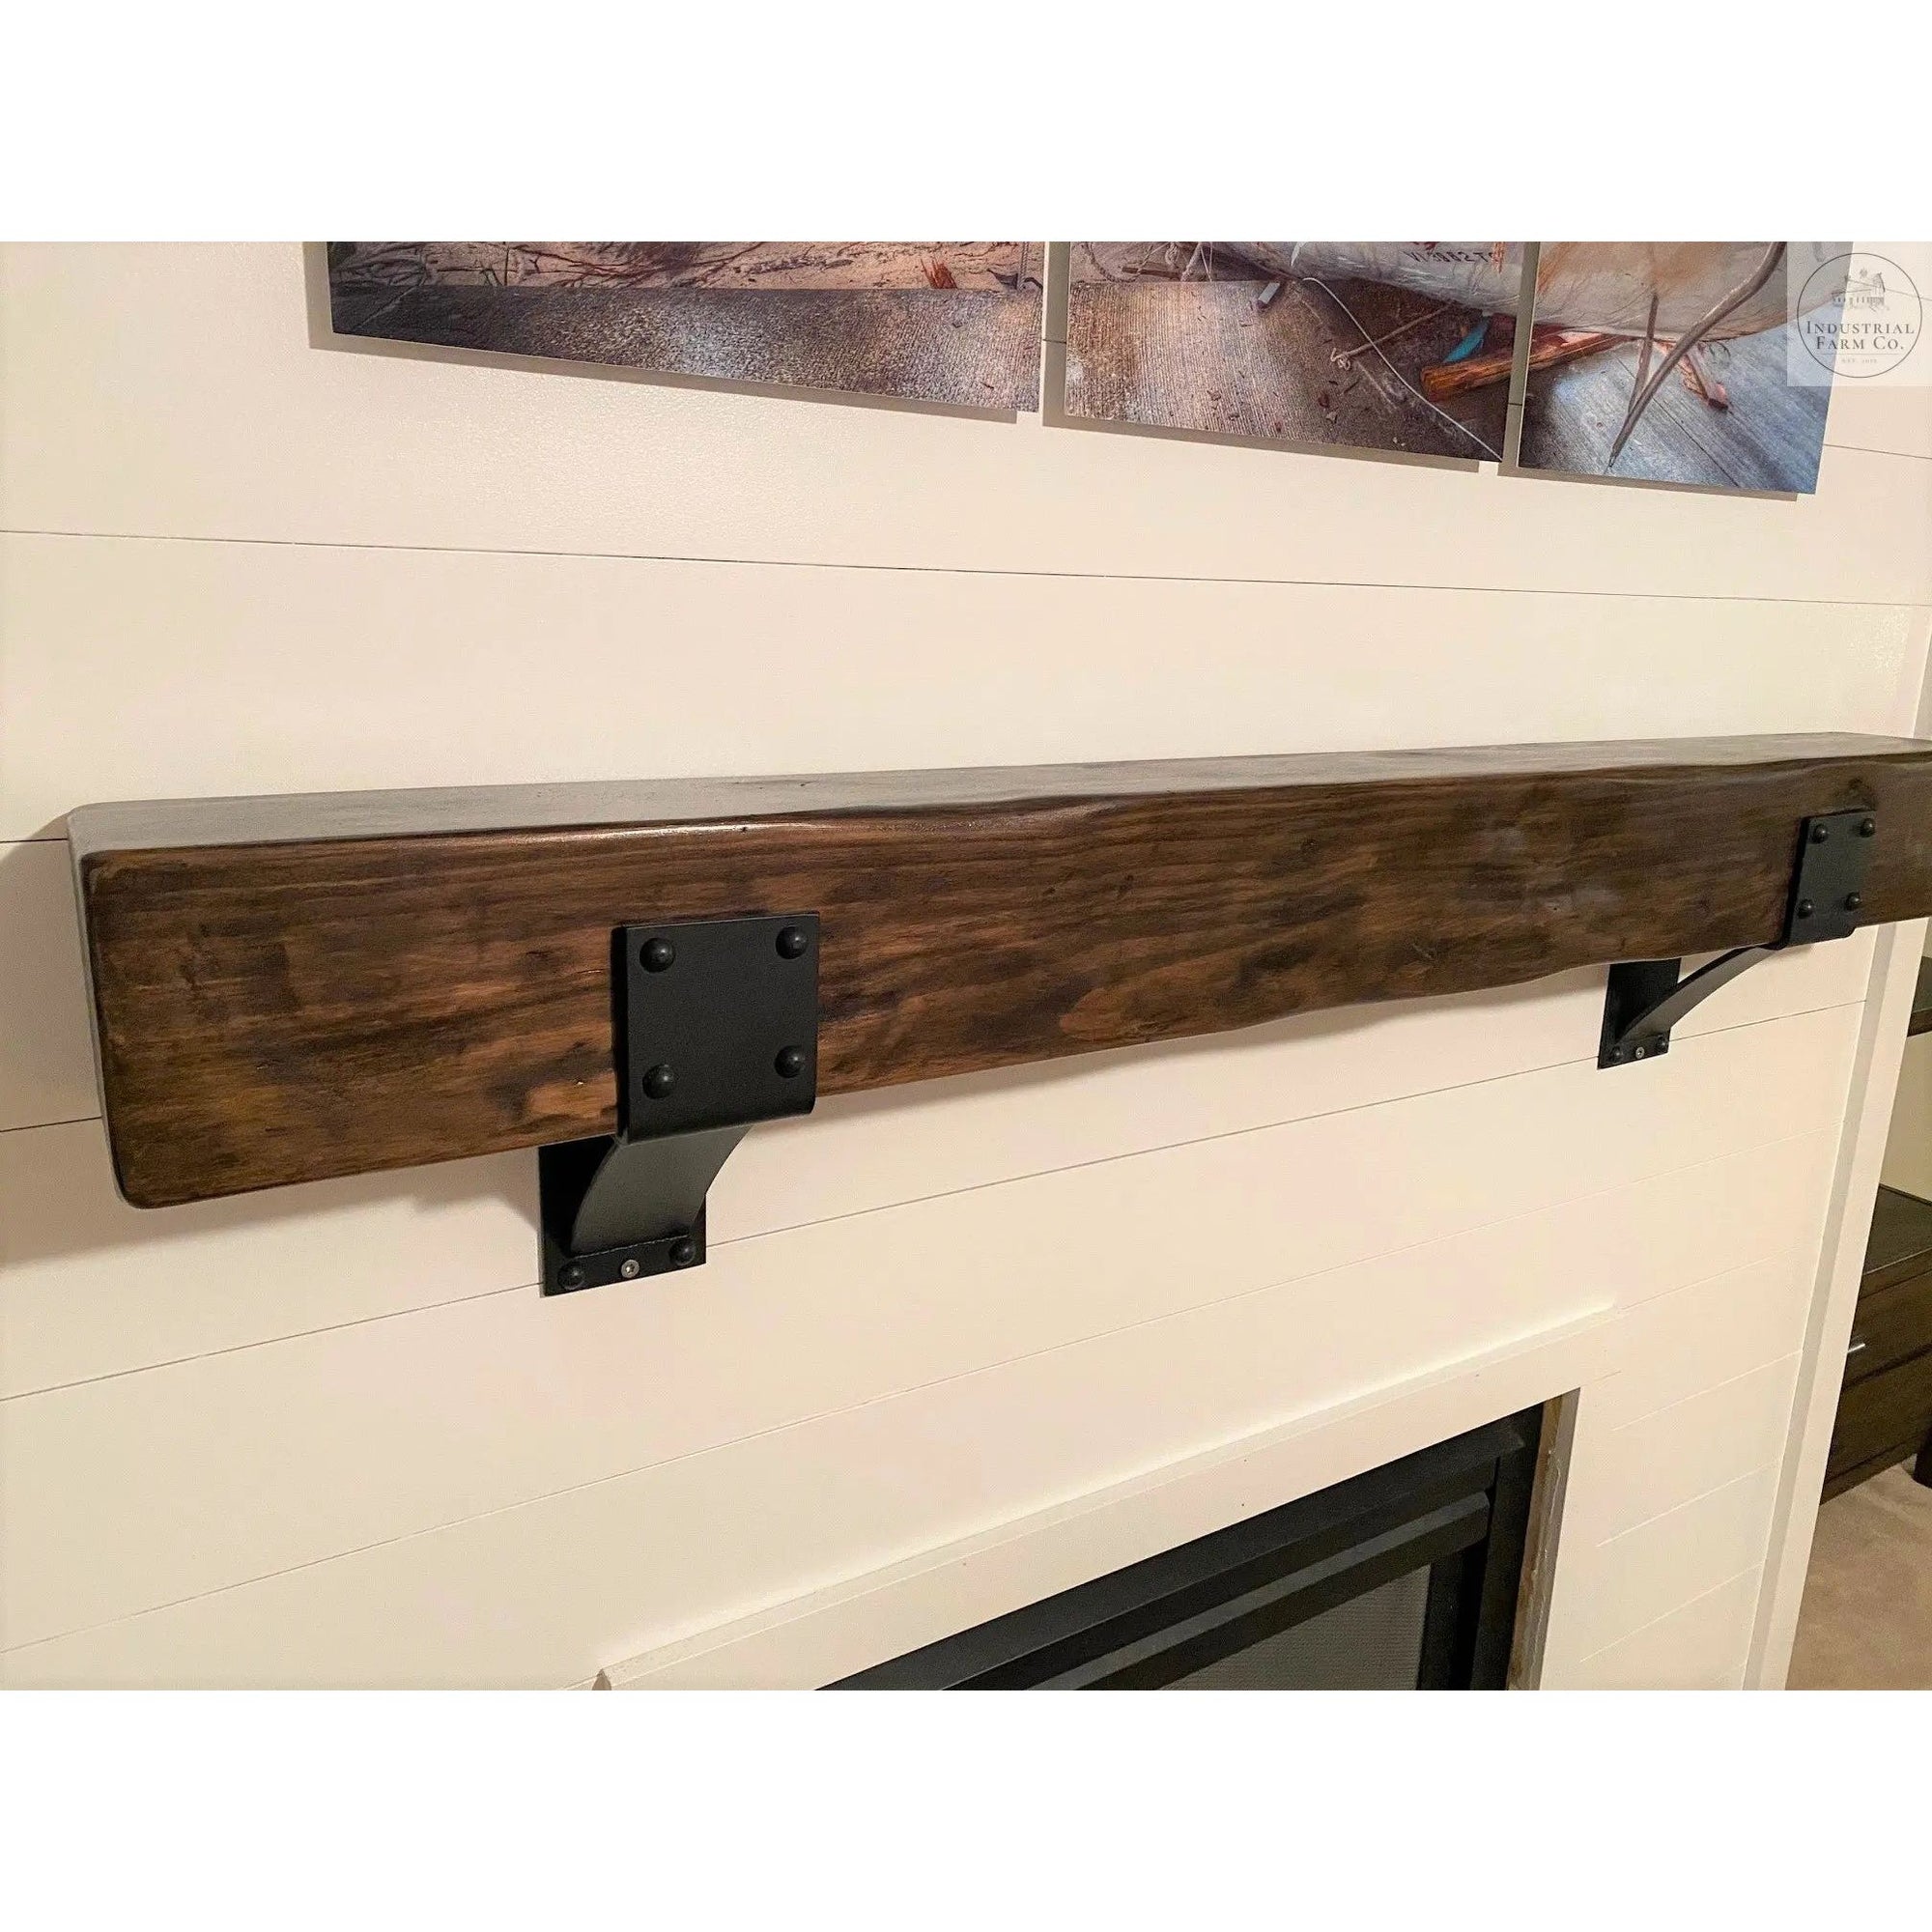 The Clermont Farmhouse Shelf Mantle Support Brackets/Corbels 6" Depth x 6" Wall Mount Length Finish Silver Powder Coat | Industrial Farm Co